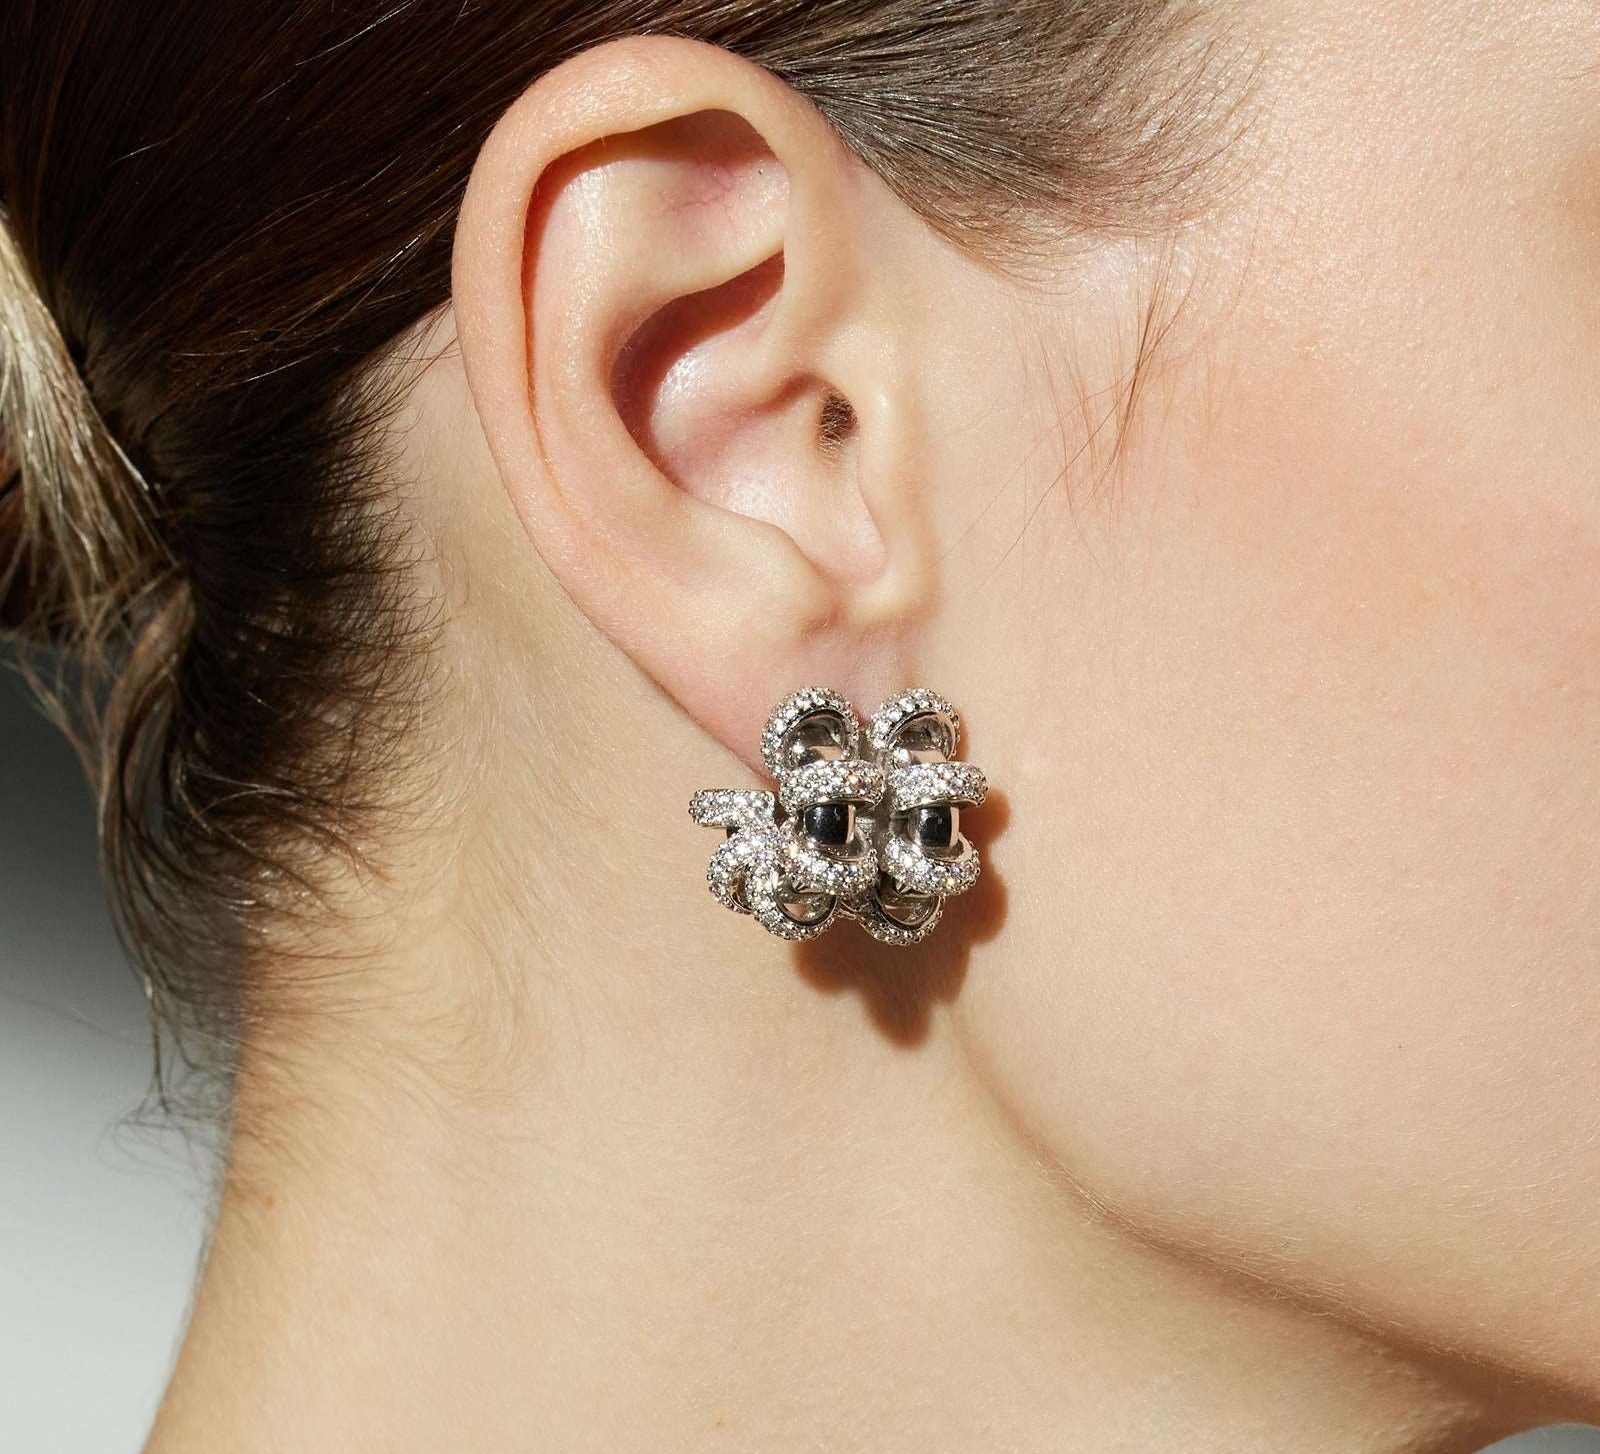 Coiled Double Earrings with sculptural twists, these earrings make a bold and artistic statement, capturing attention with their unique and eye-catching design.